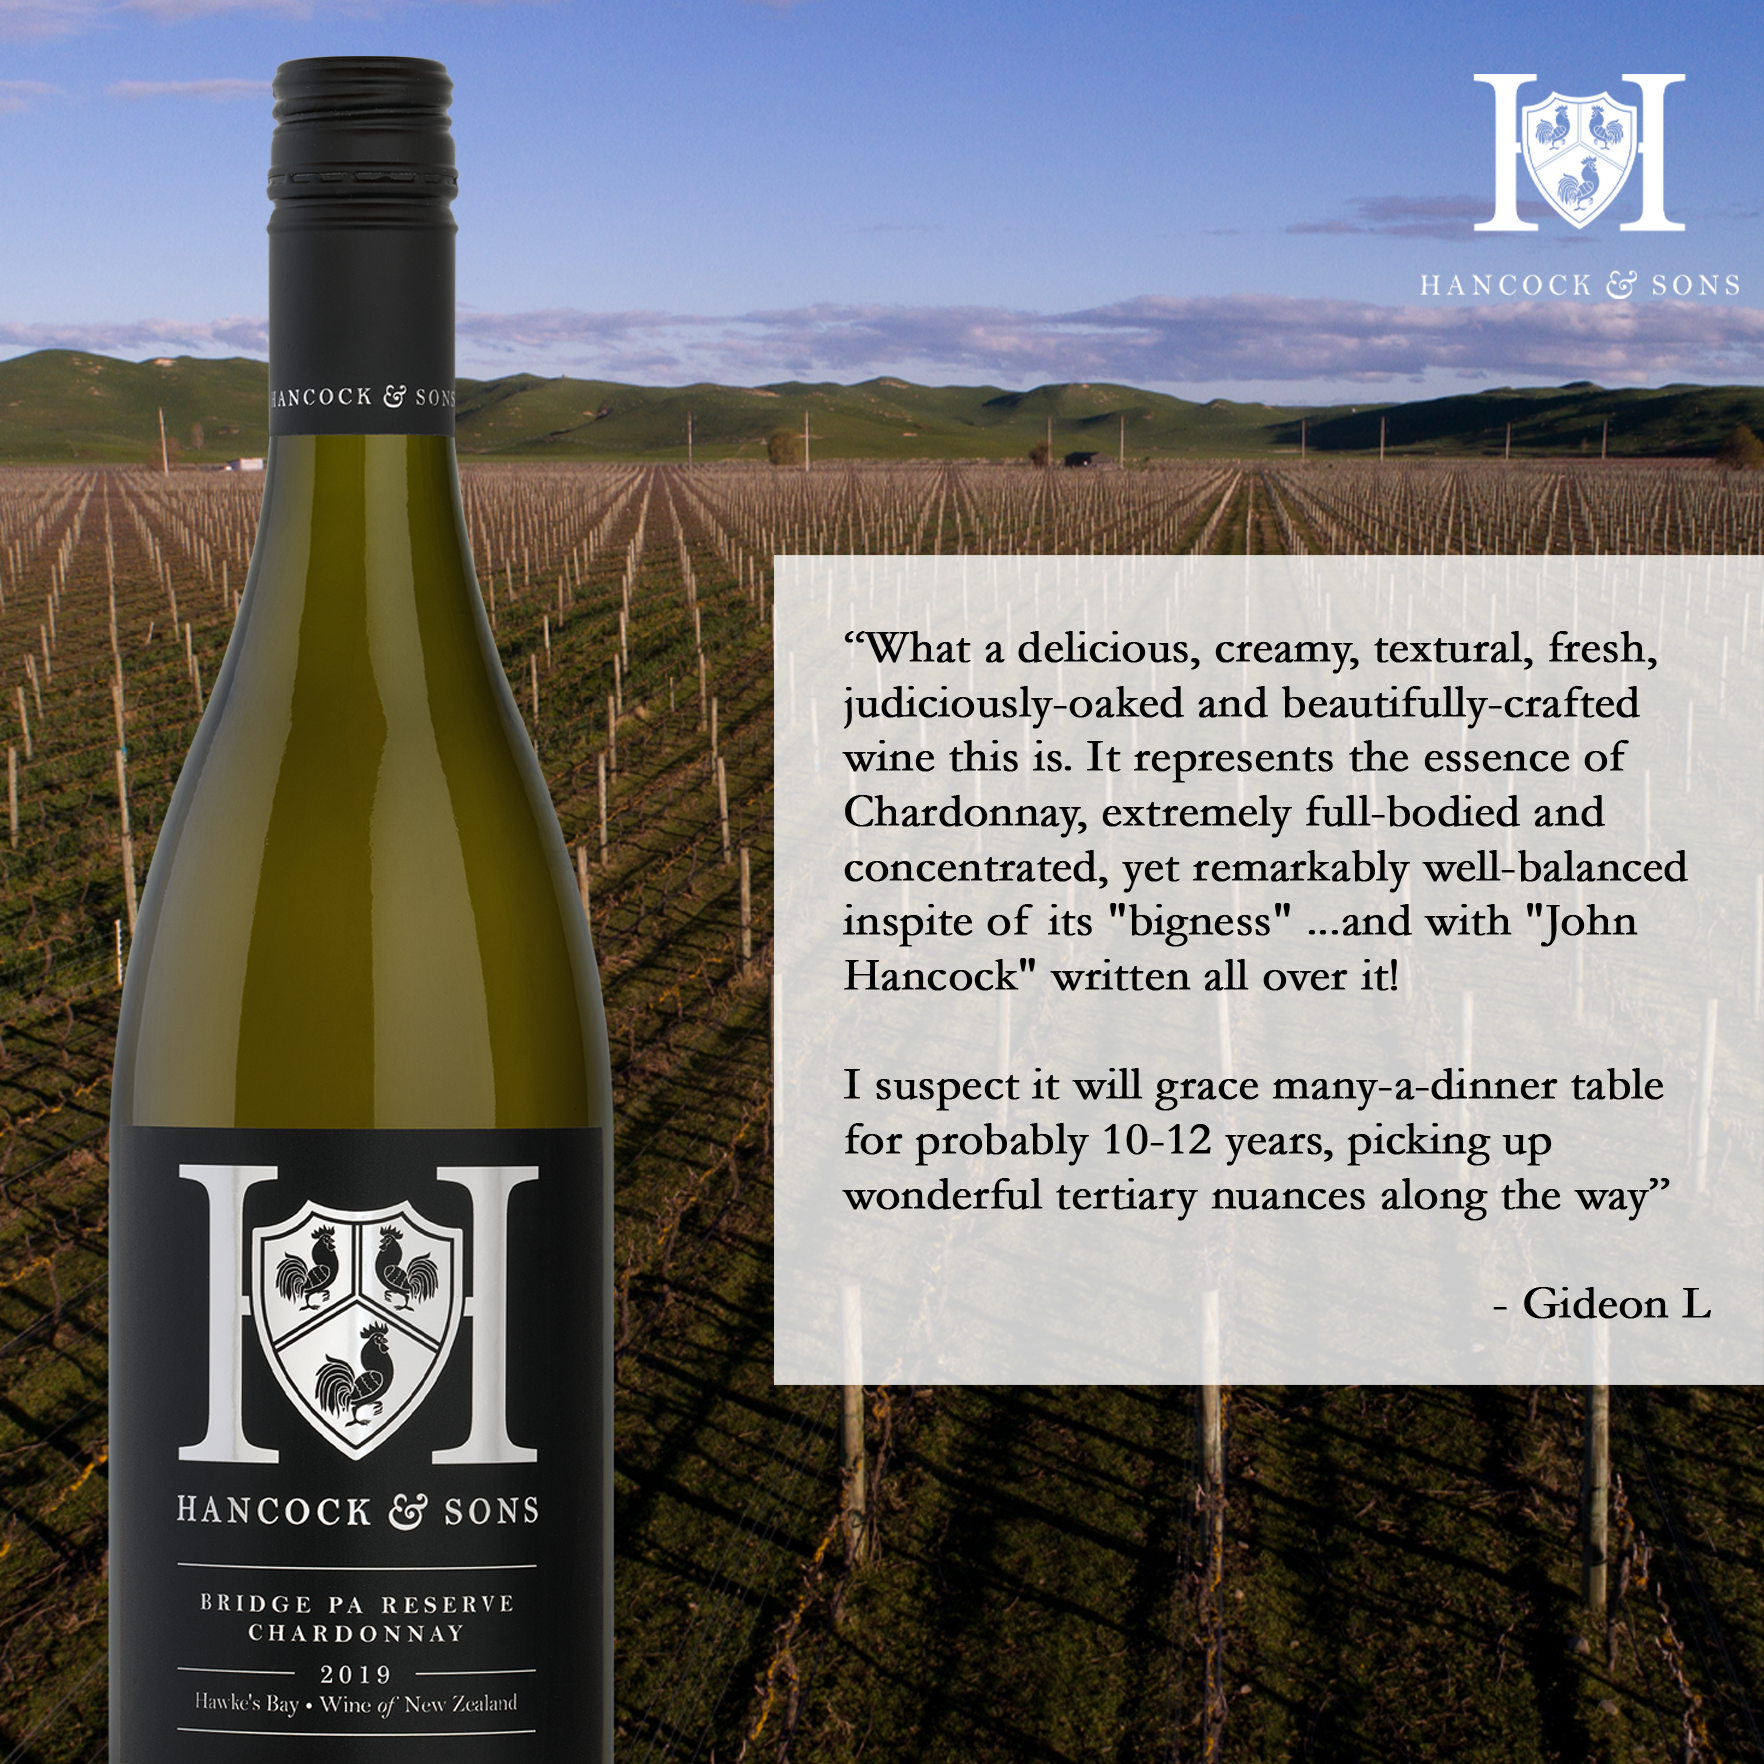 Consumer Review – 2019 Reserve Chardonnay